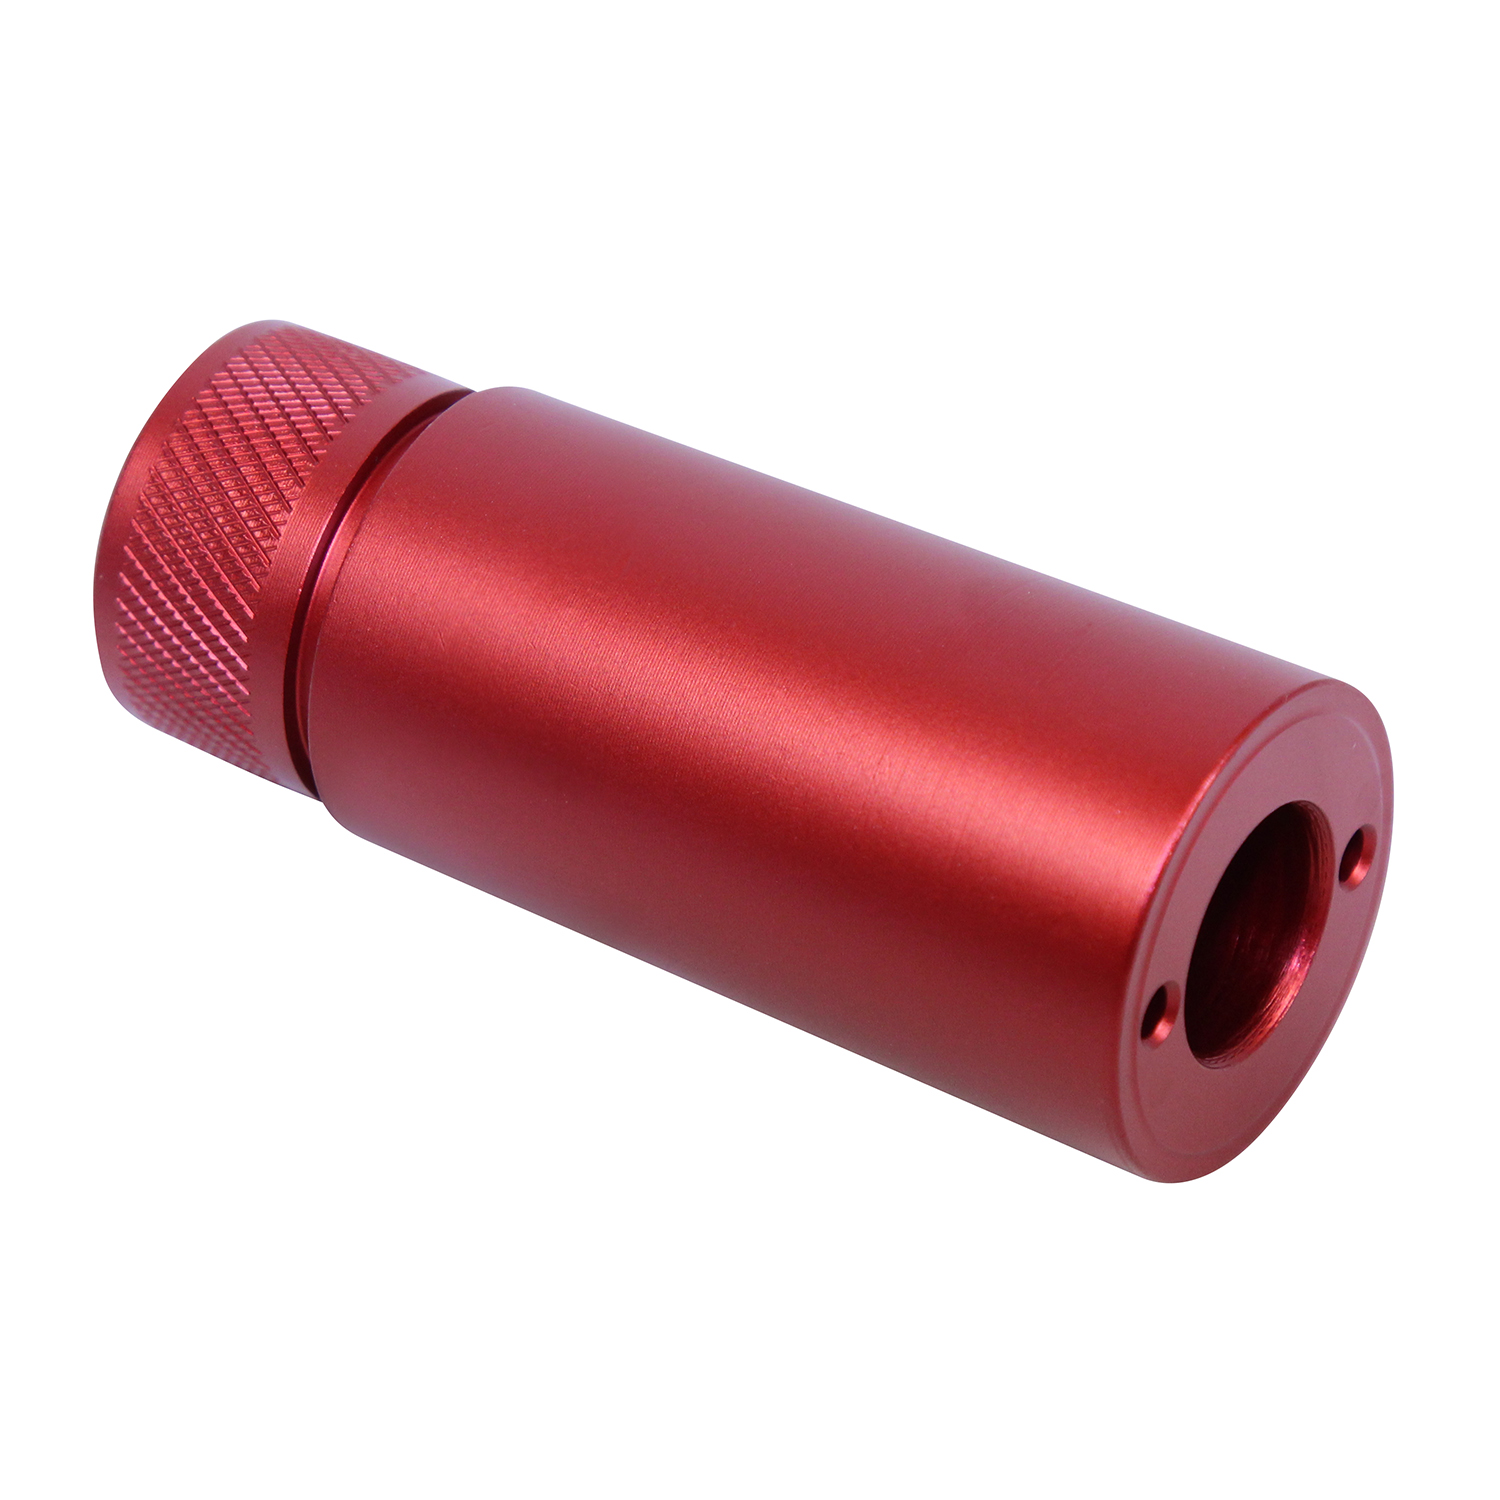 Red anodized AR-10 .308 Cal 3-inch fake suppressor